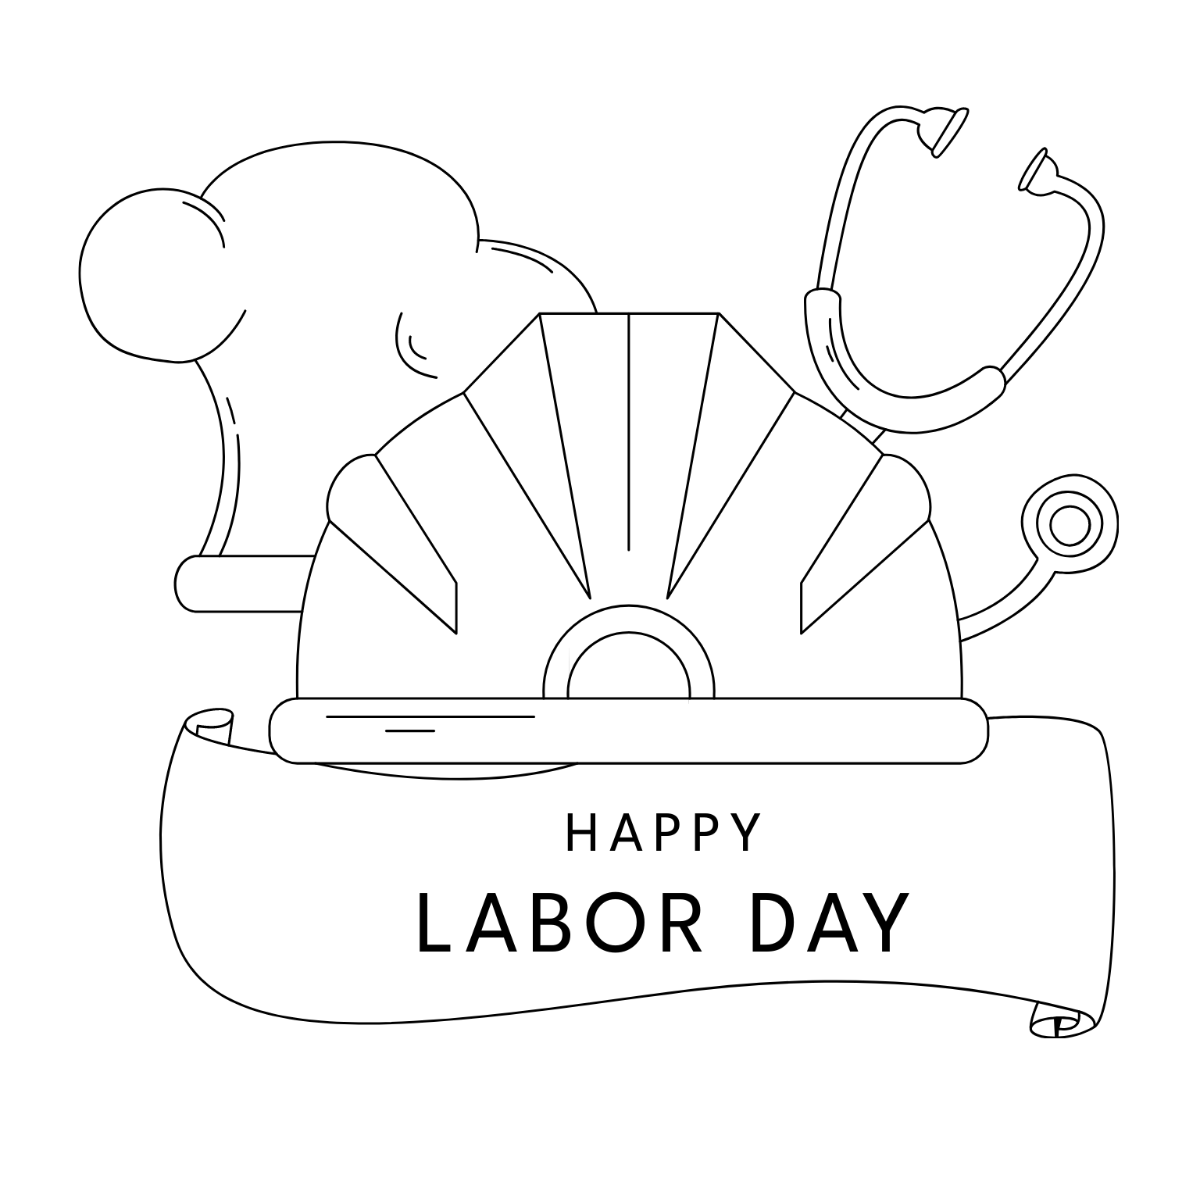 Free Labor Day Illustrator Drawing Template